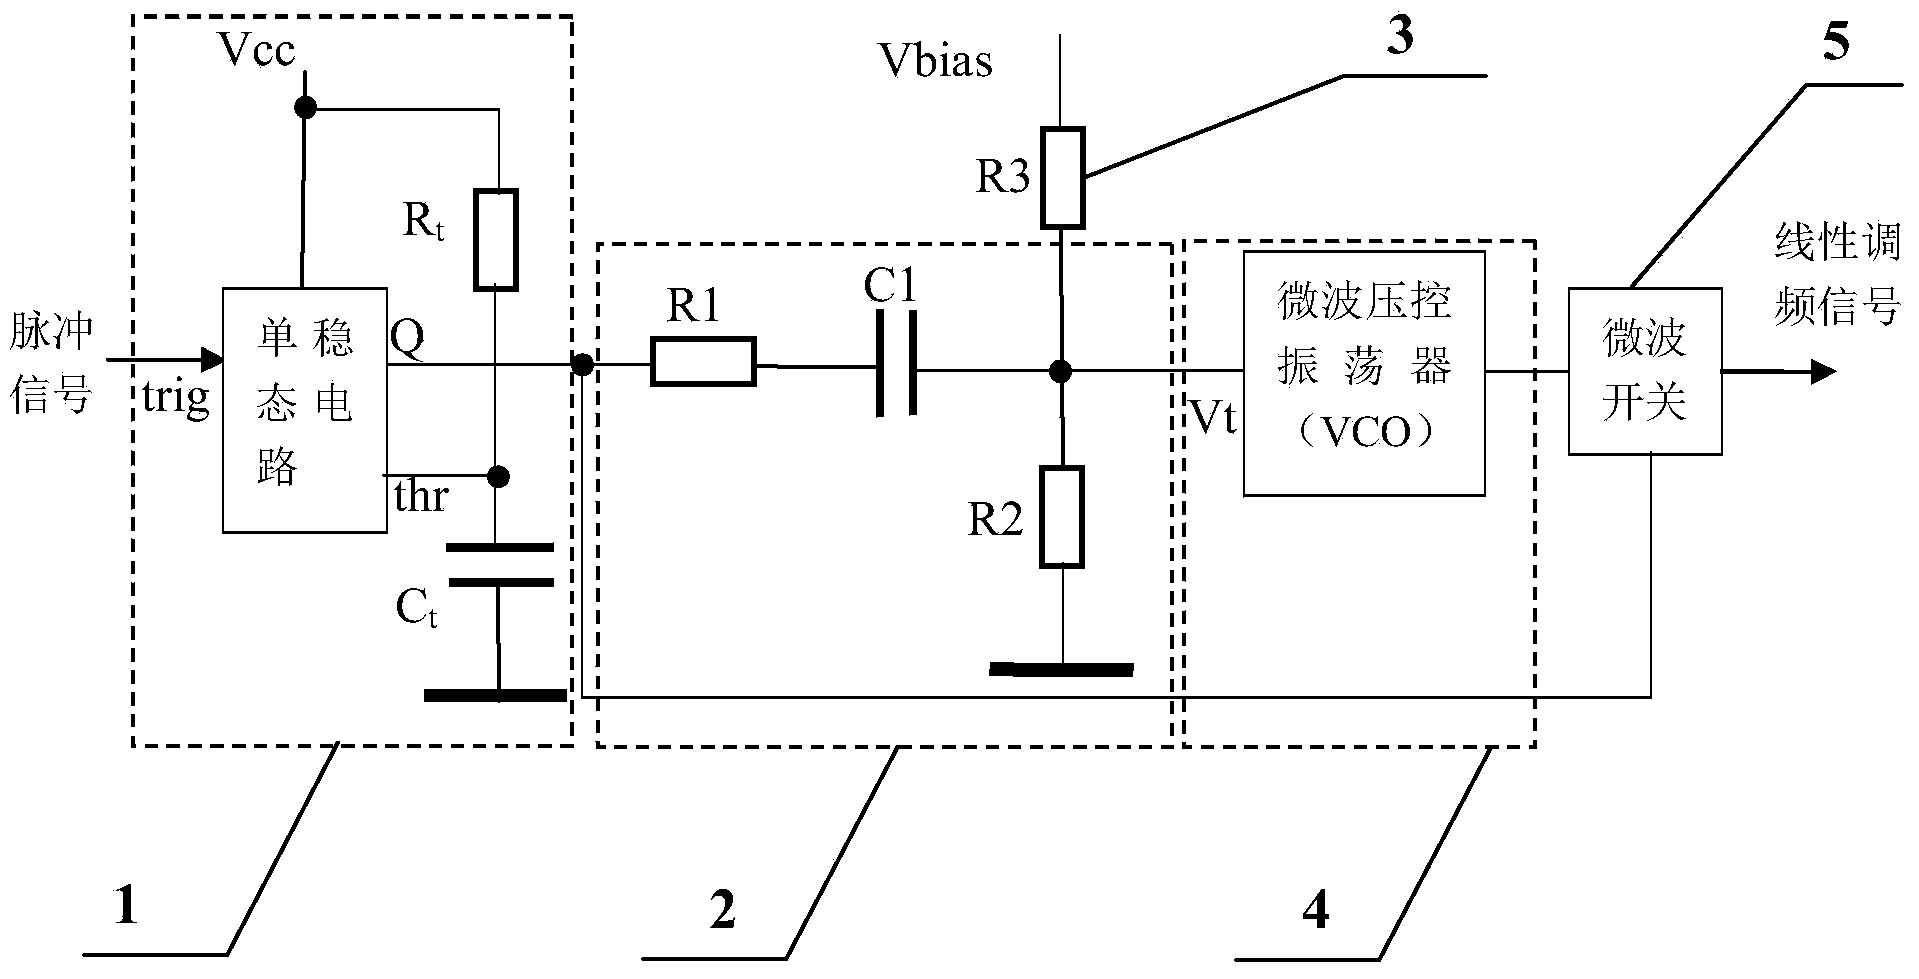 Microwave VCO directly-modulated high-linearity frequency modulated signal generating circuit